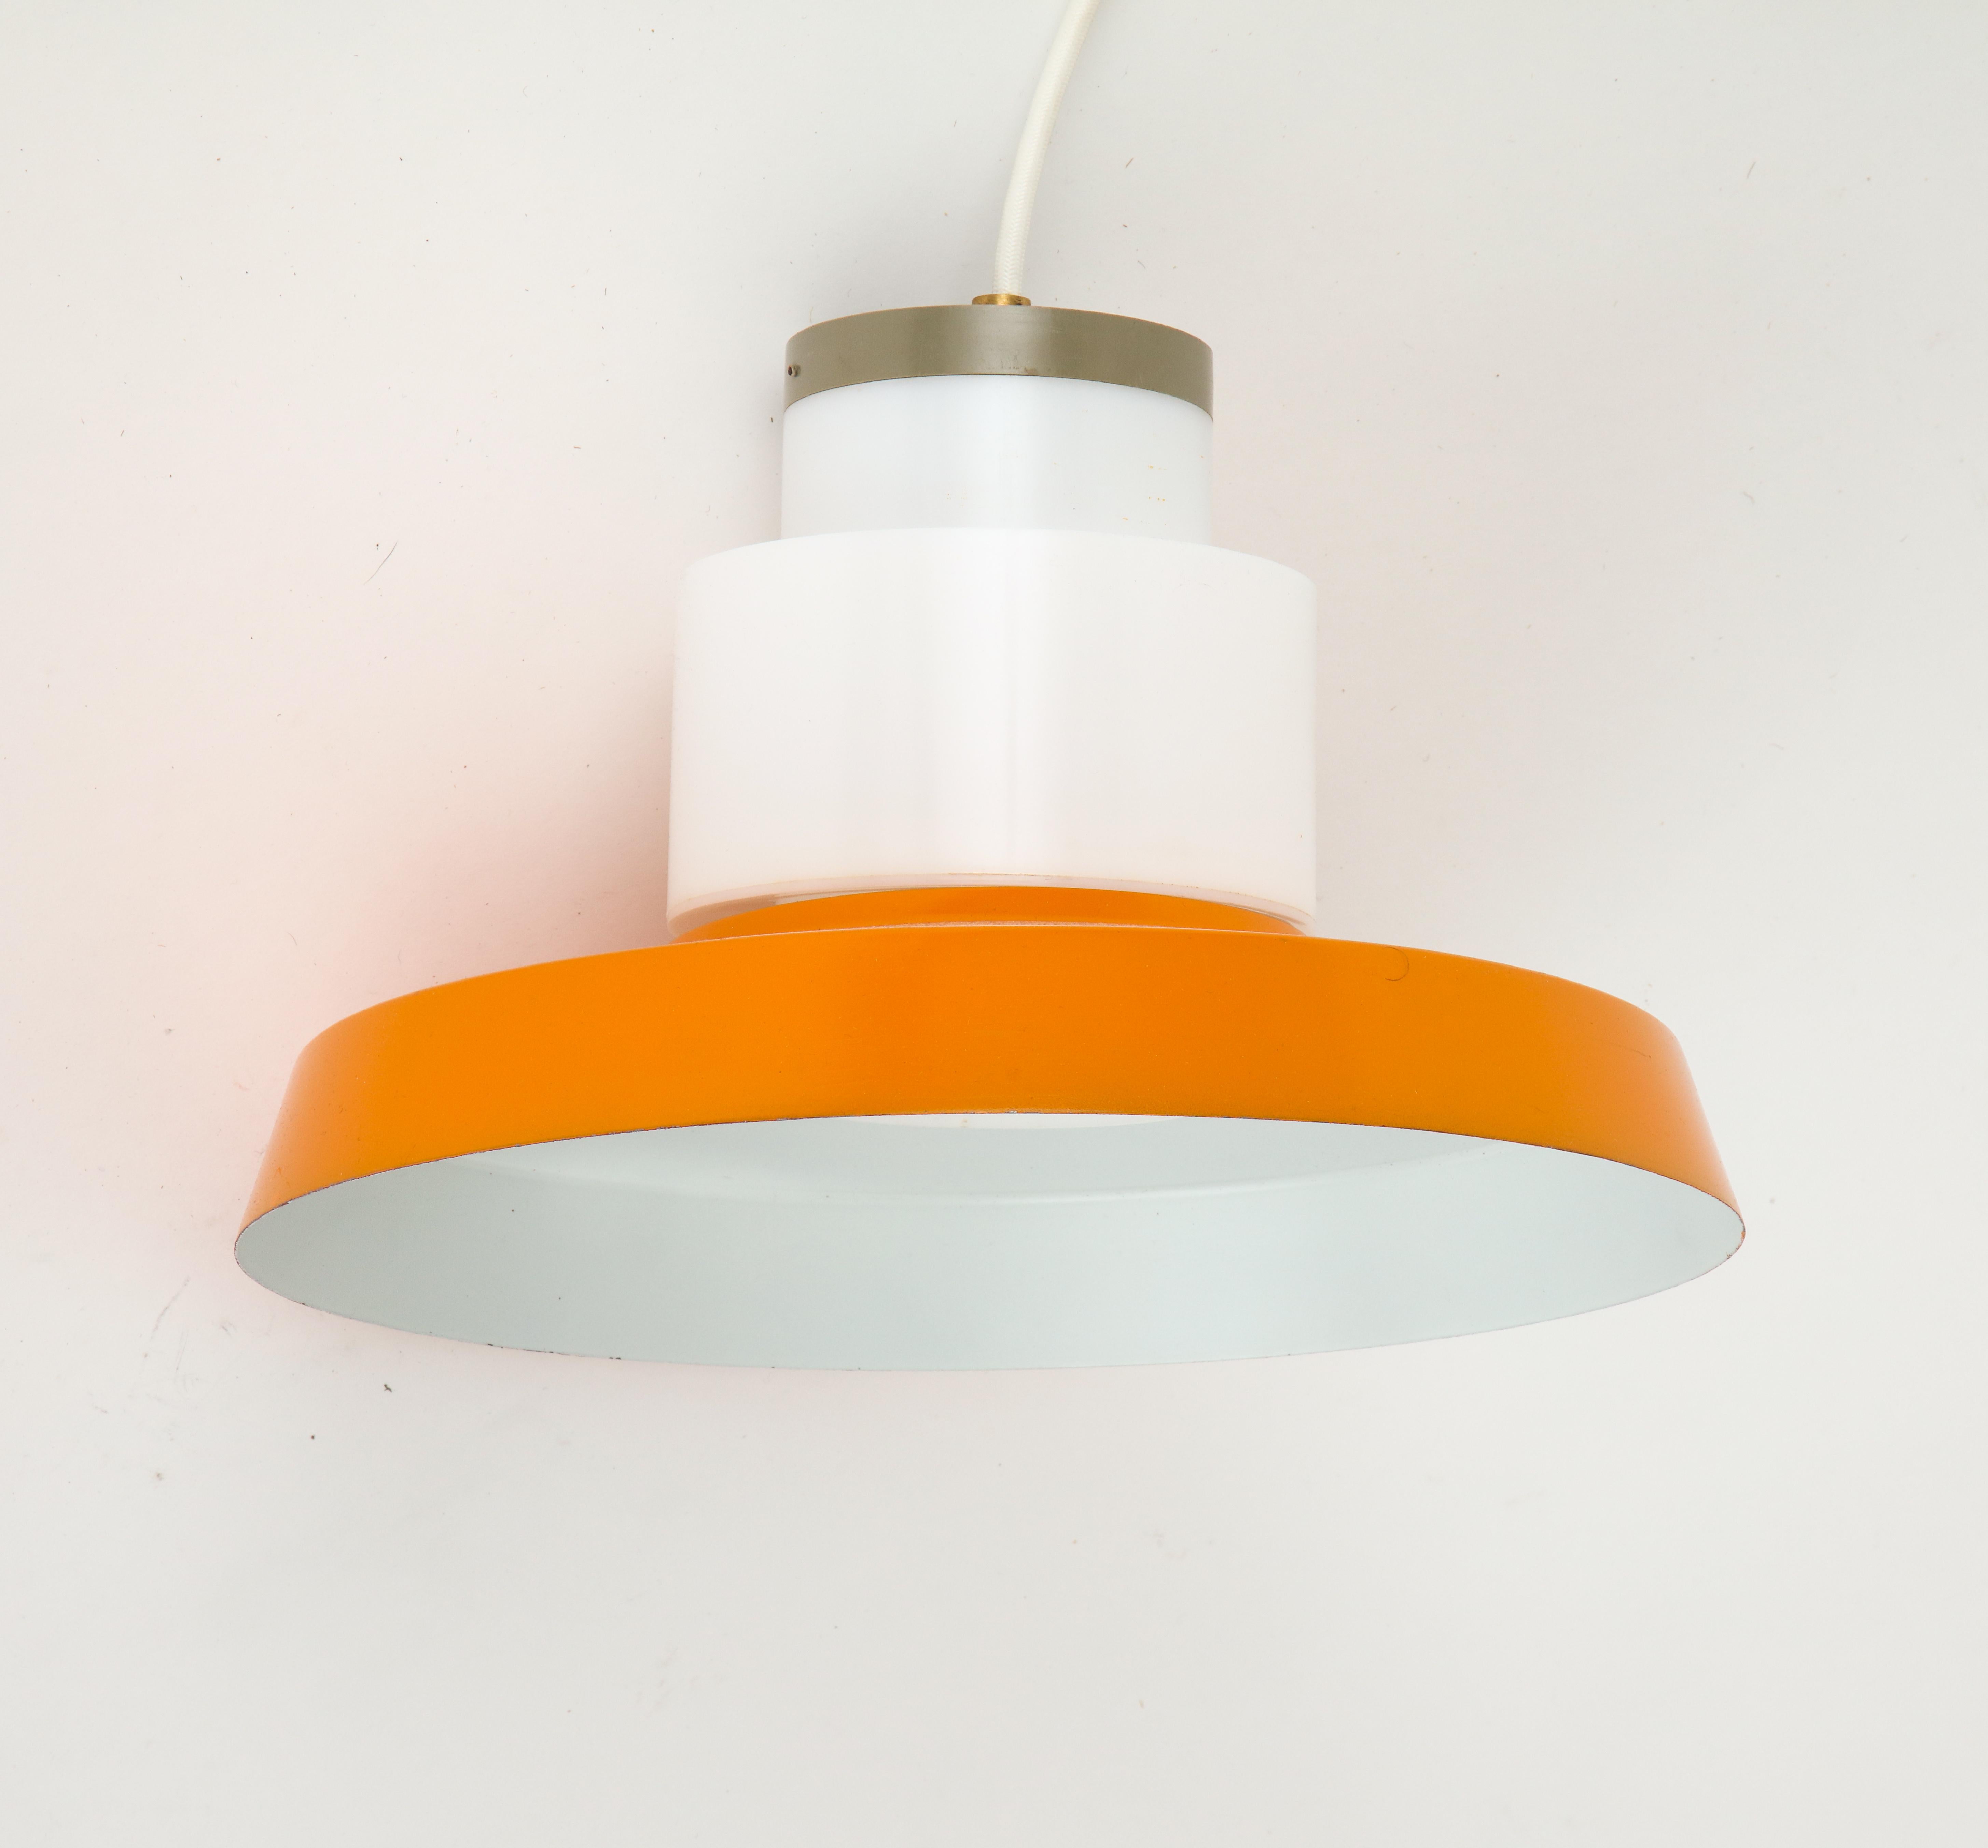 Danish orange and white pendant from the 1960s.

Wired to US standards.